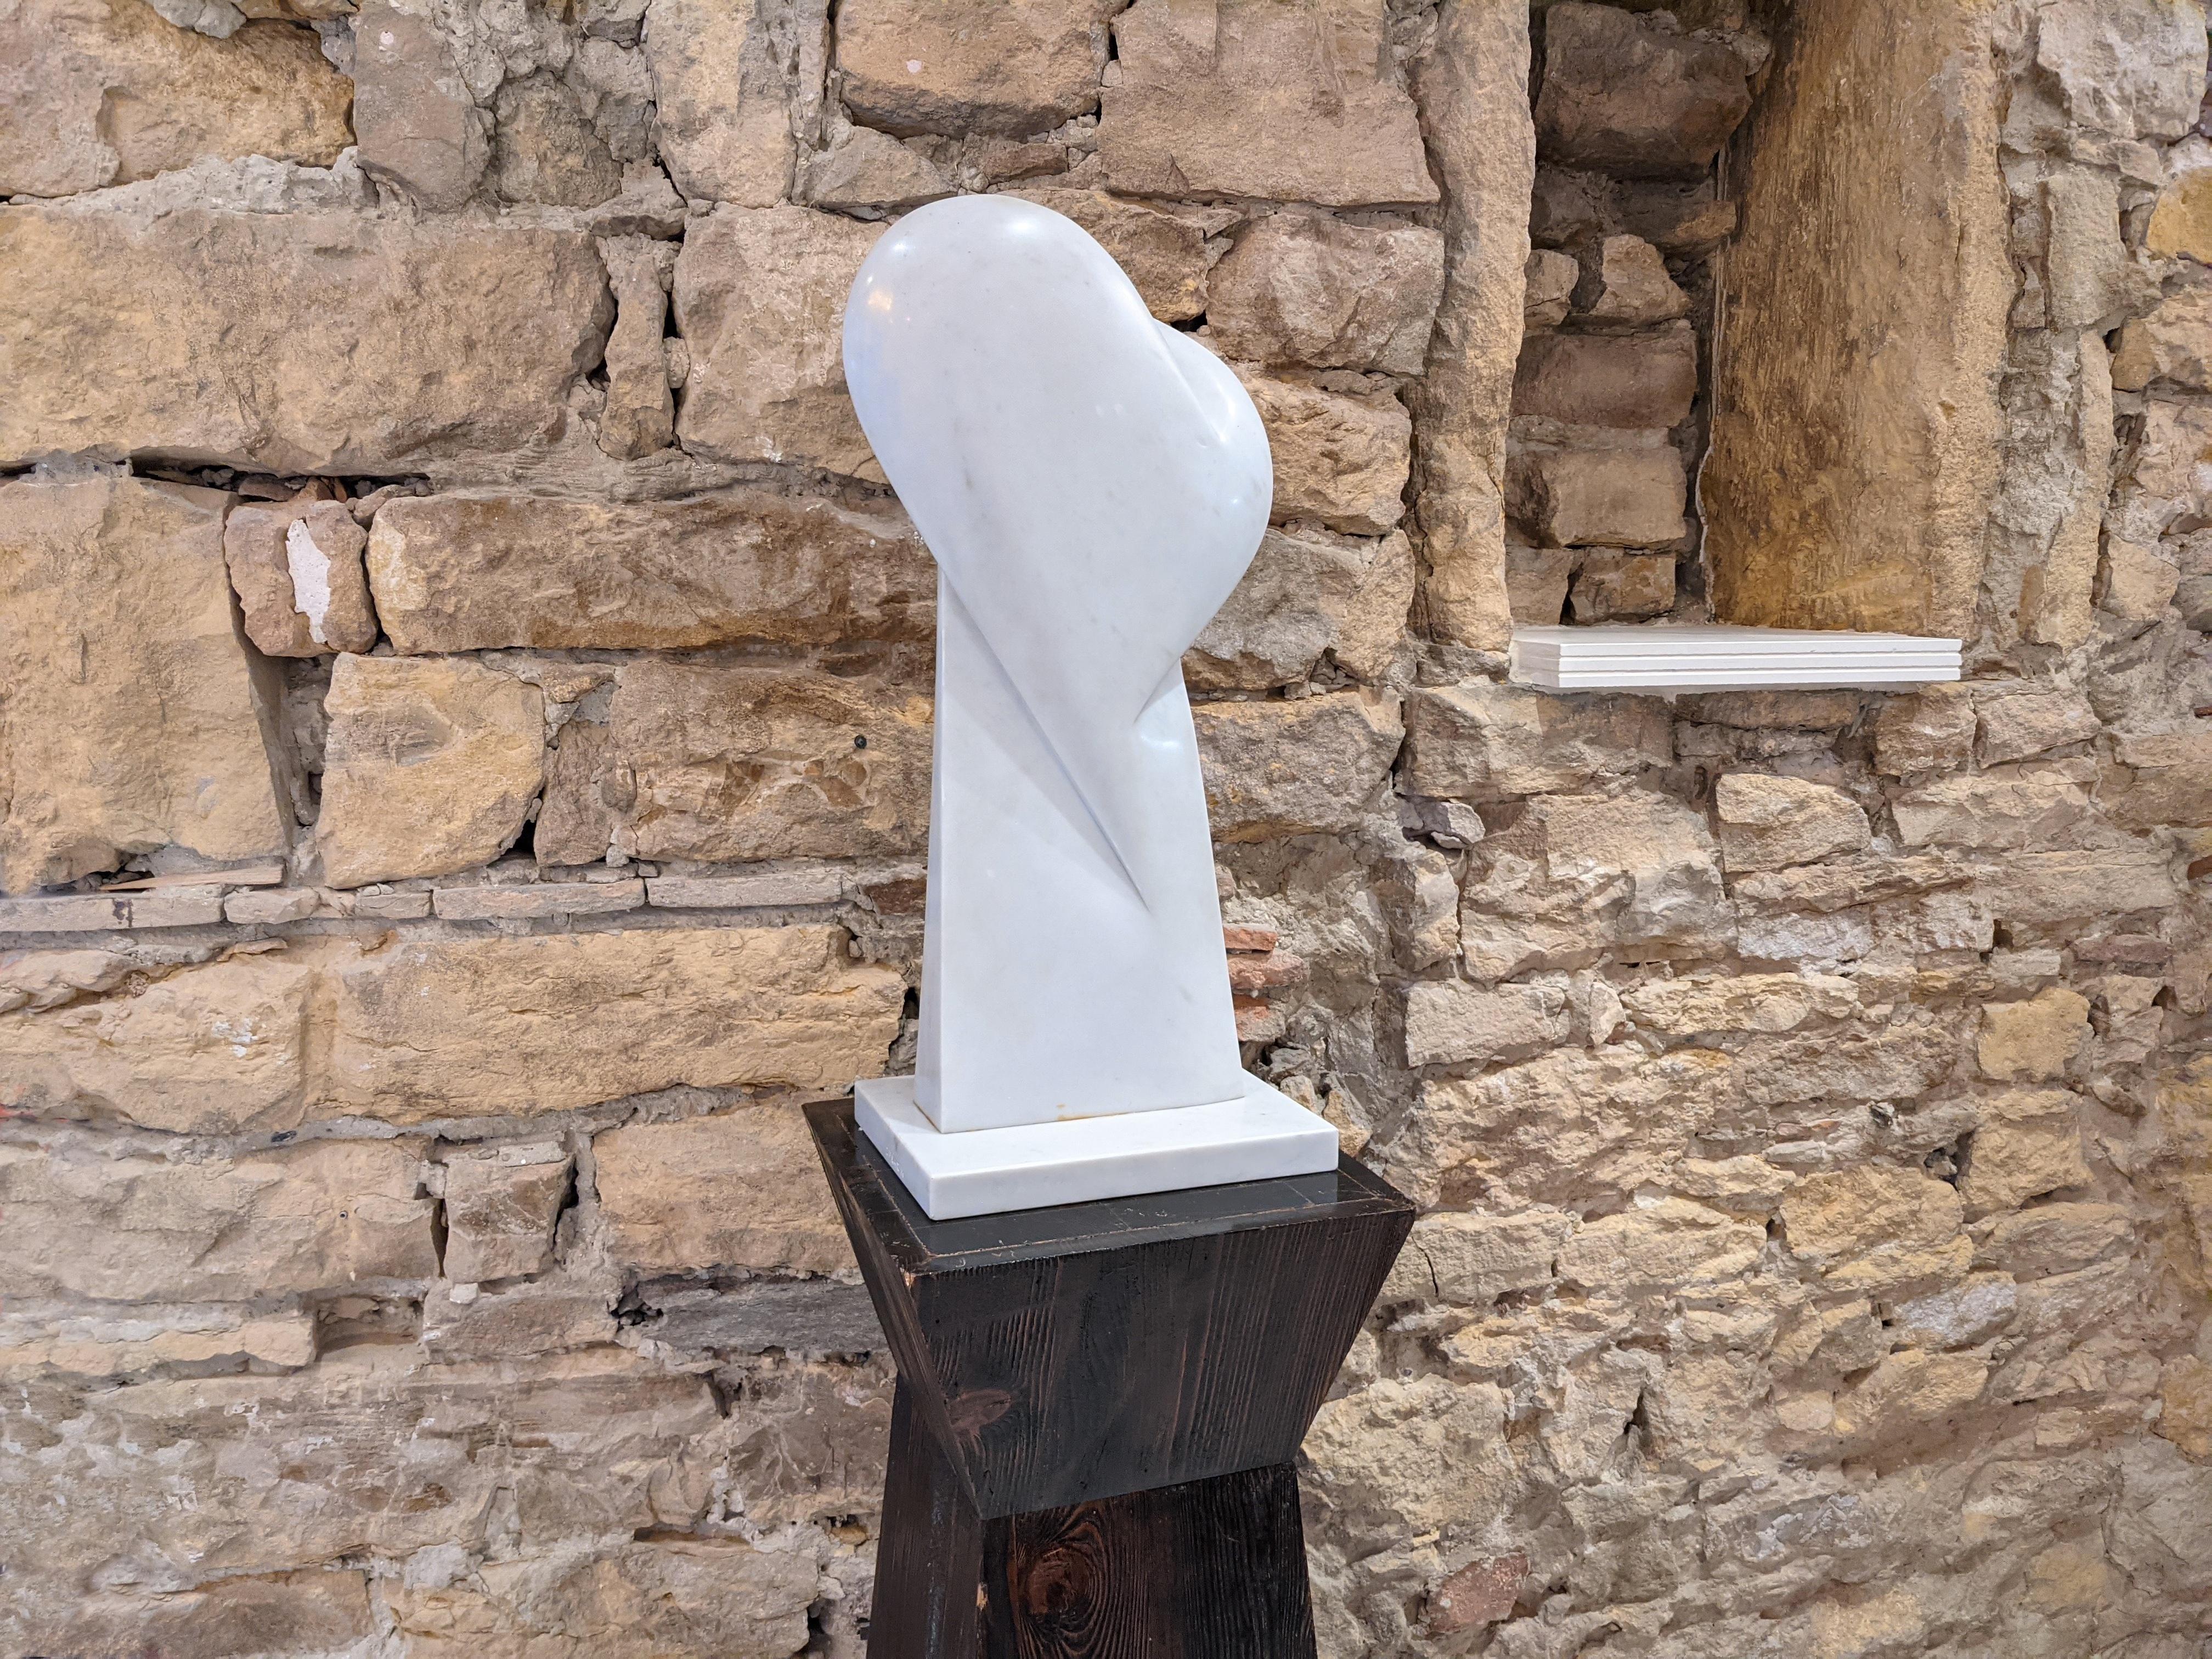 Sculpture in white Carrara marble by Bertrand Créac'h. Very good condition. The pedestal is not for sale.